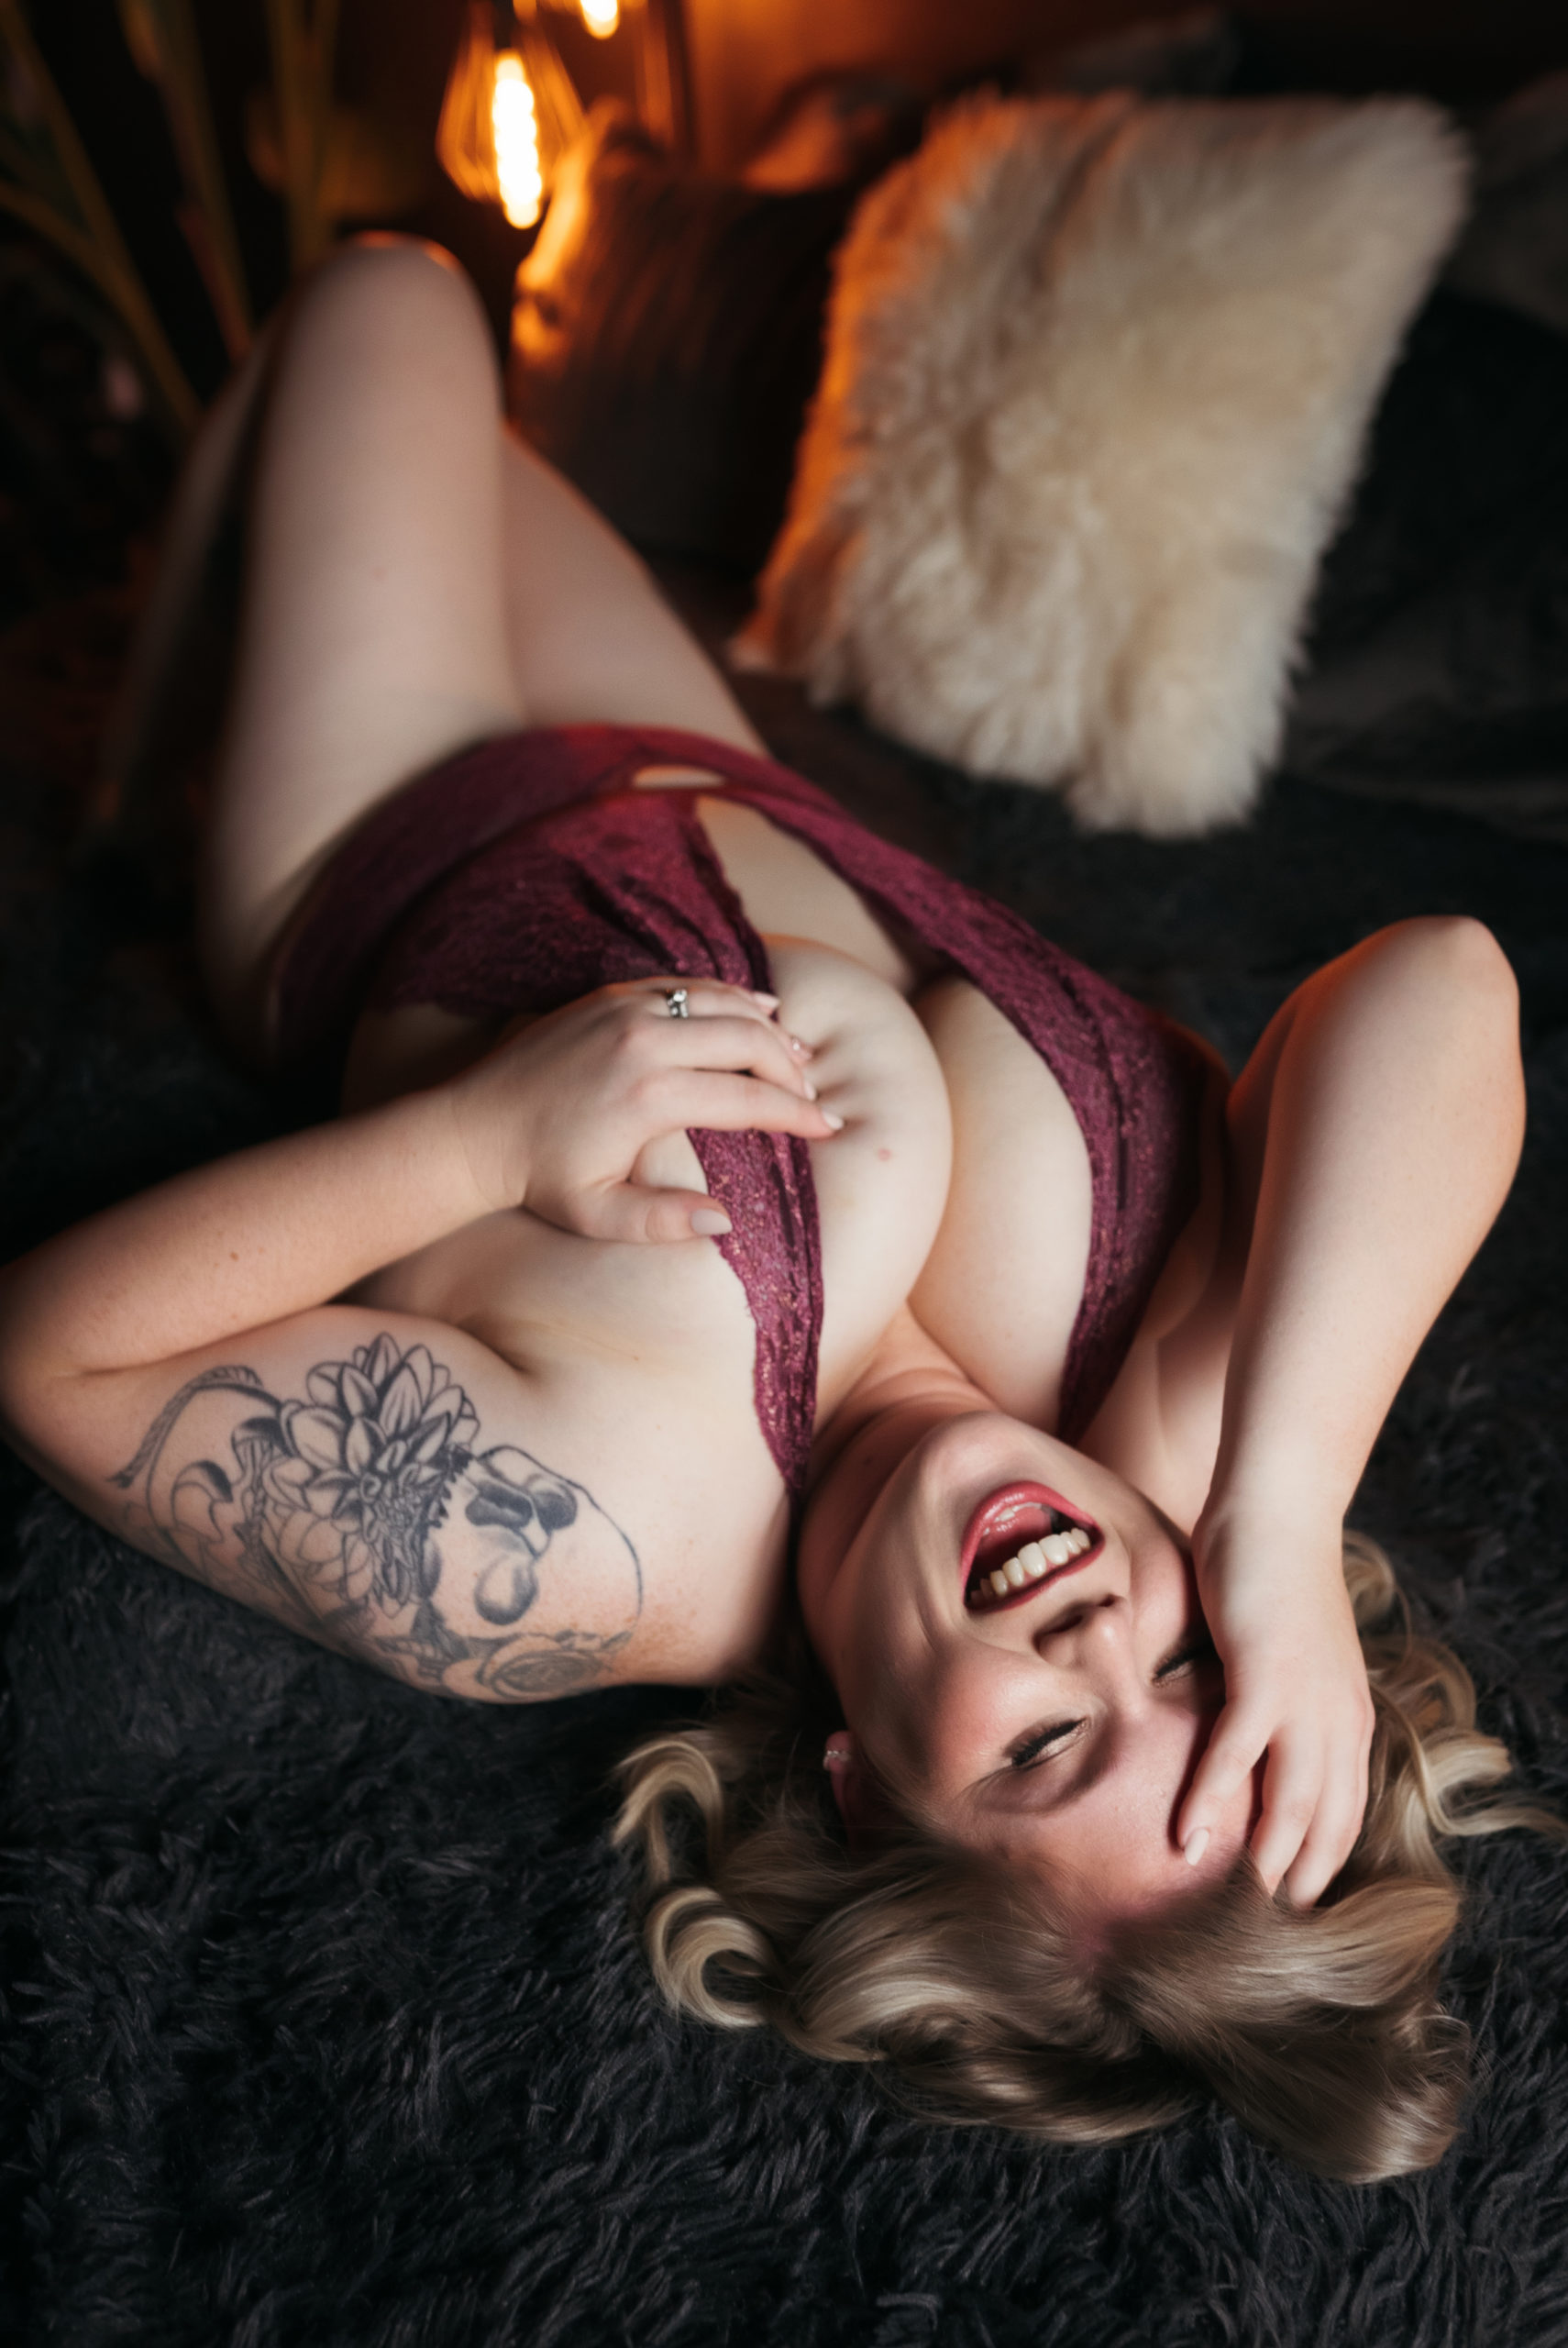 A blonde woman lies on a bed while laughing during a sensual boudoir photoshoot